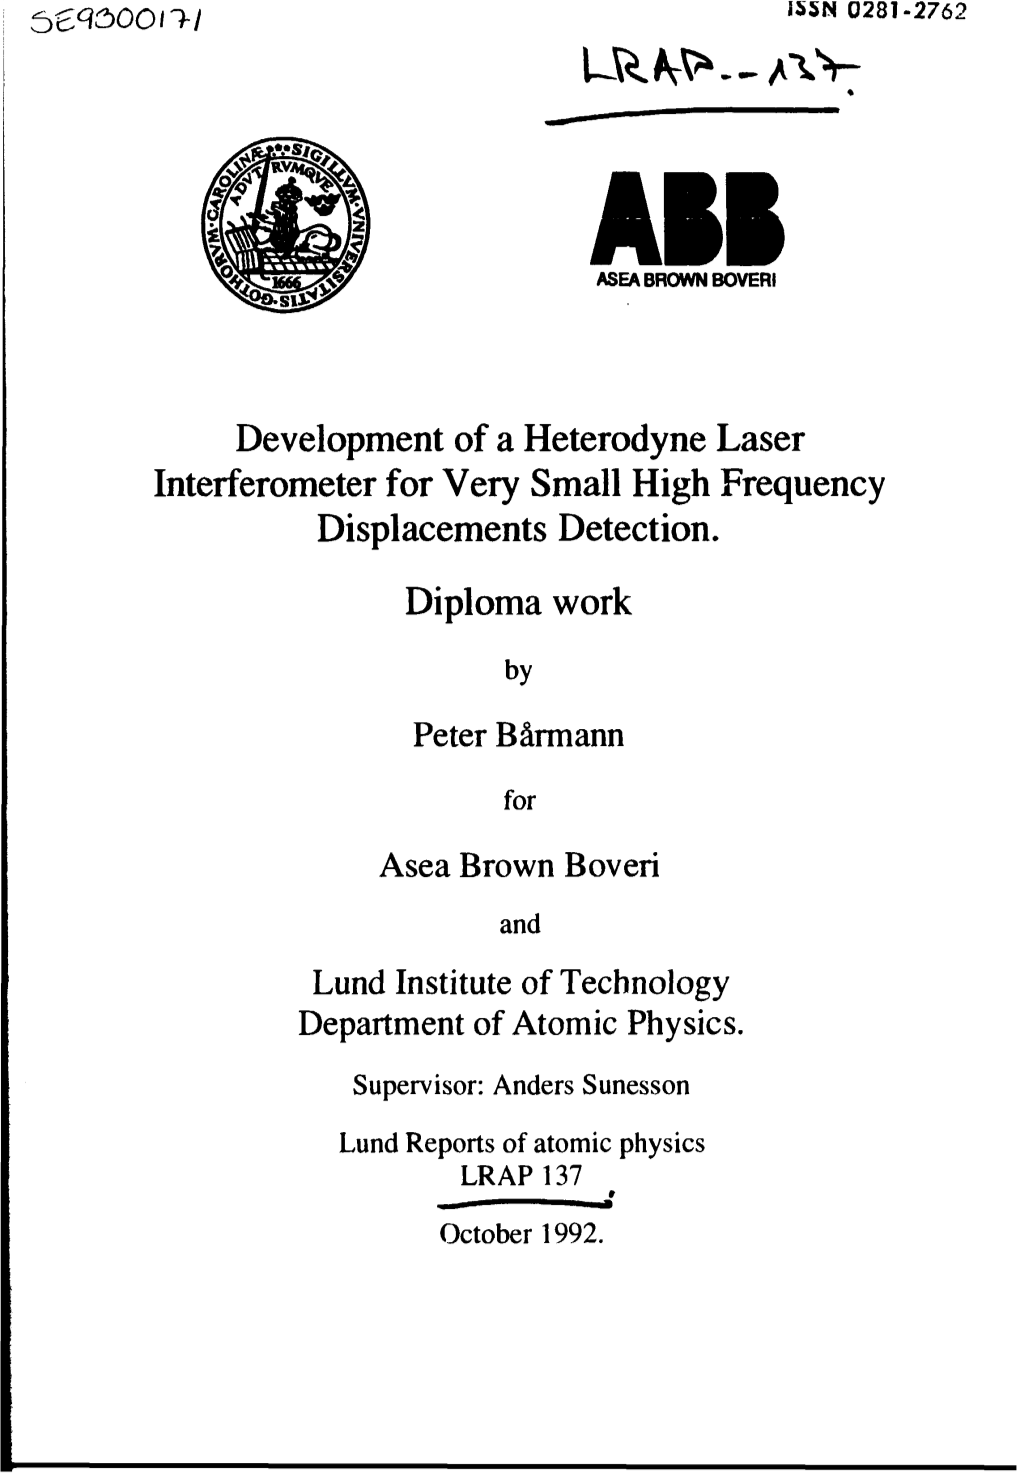 Development of a Heterodyne Laser Interferometer for Very Small High Frequency Displacements Detection. Diploma Work